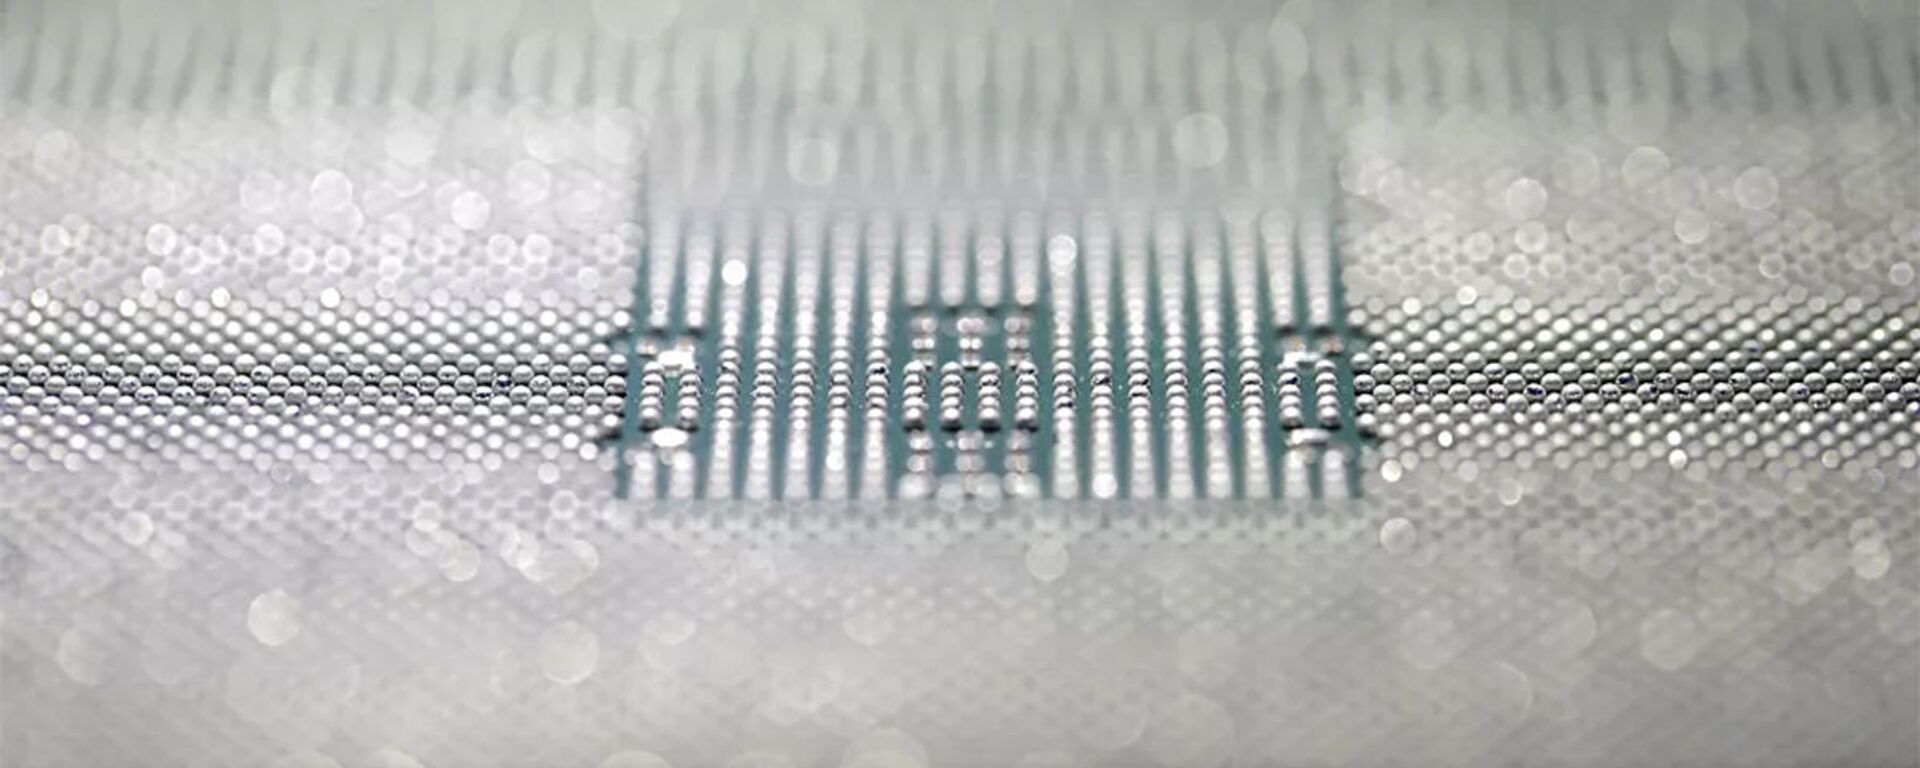 A Kunpeng 920 chip is displayed during an unveiling ceremony in Shenzhen, China, Monday, Jan. 7, 2019. Chinese telecom giant Huawei unveiled a processor chip for data centers and cloud computing as it expands into an emerging global market despite Western warnings the company might be a security risk.  - 俄羅斯衛星通訊社, 1920, 21.06.2021